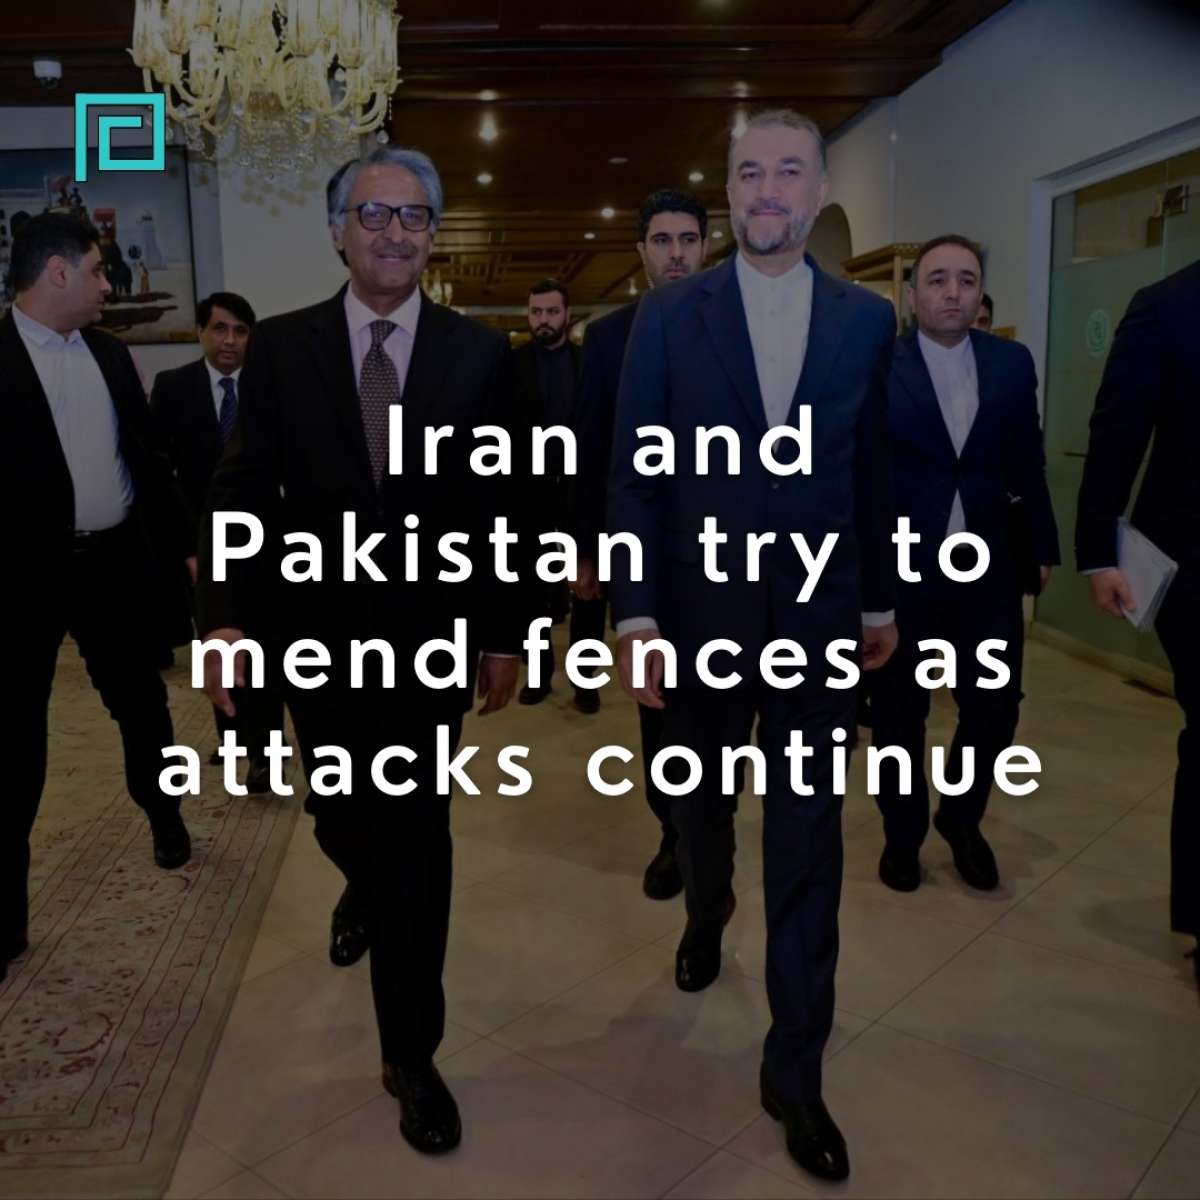 Iran and Pakistan try to mend fences as attacks continue